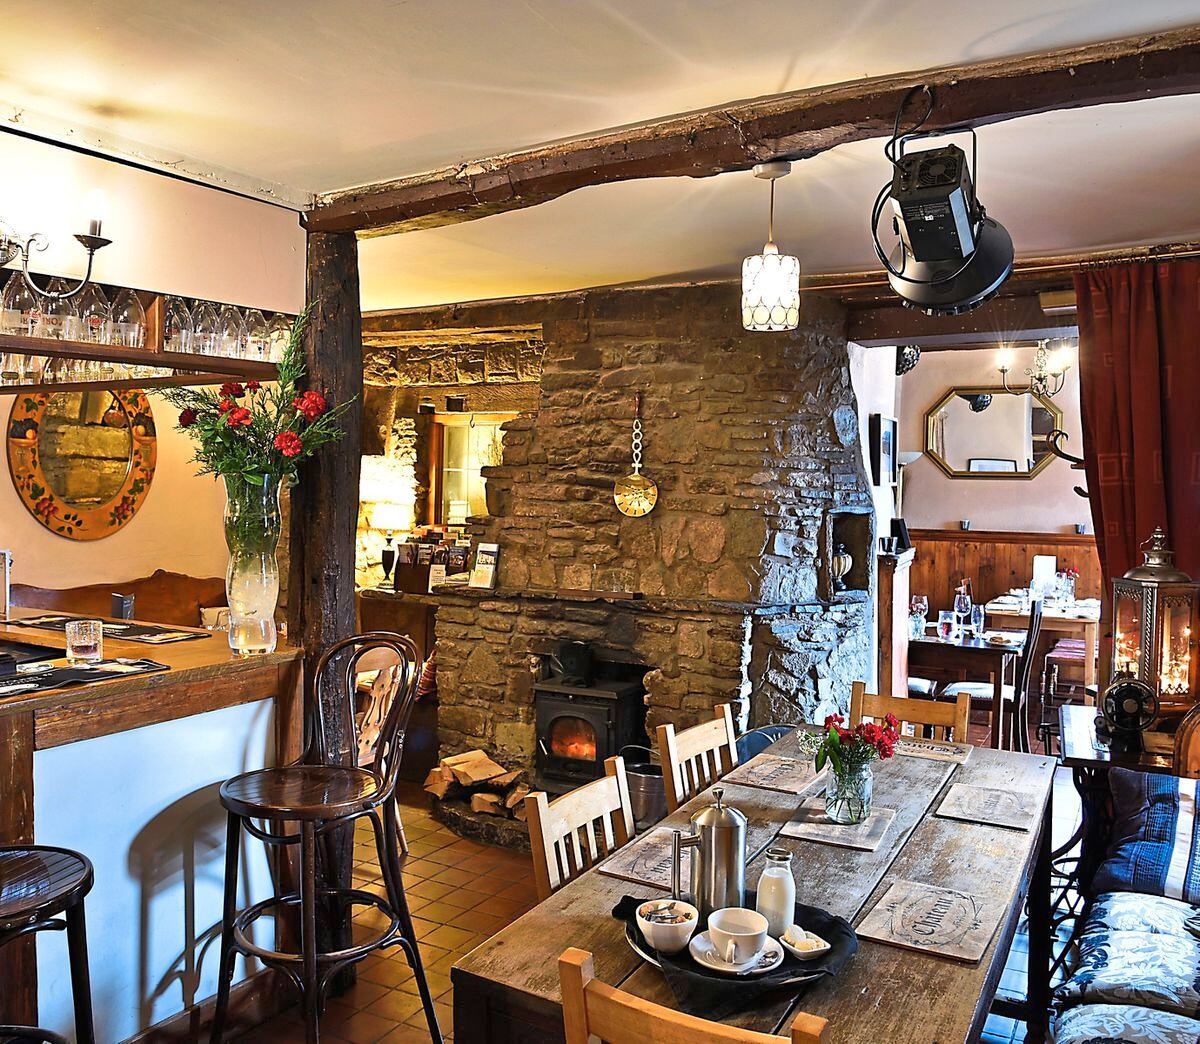 Olde worlde – inside is cosy and snug